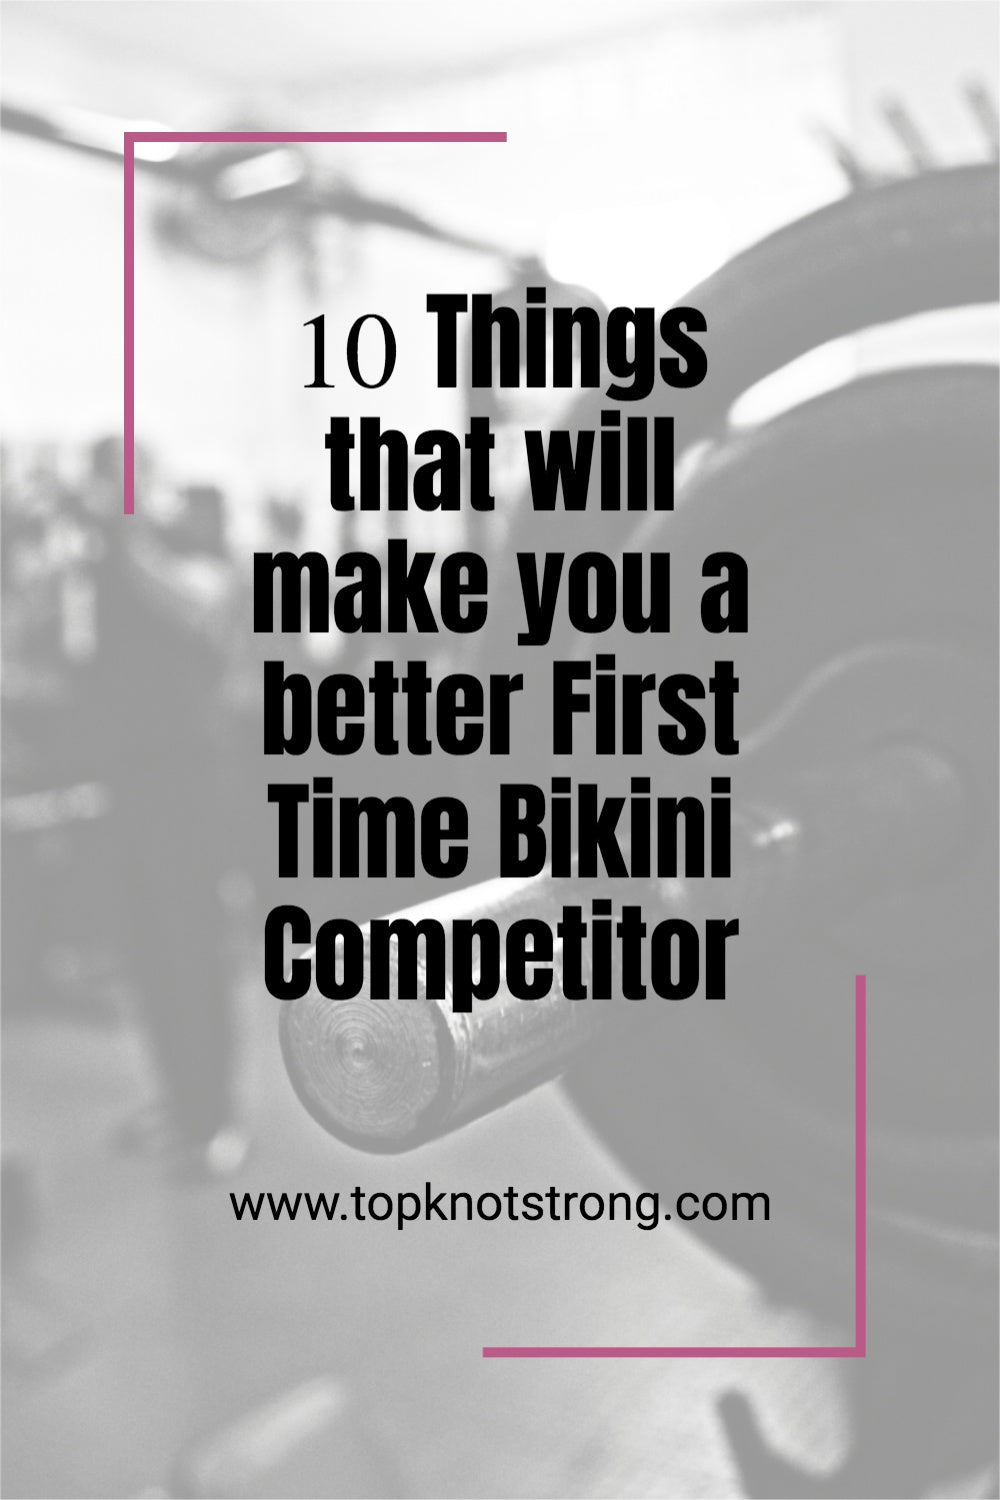 10 Things that will make you a better First Time Bikini Competitor